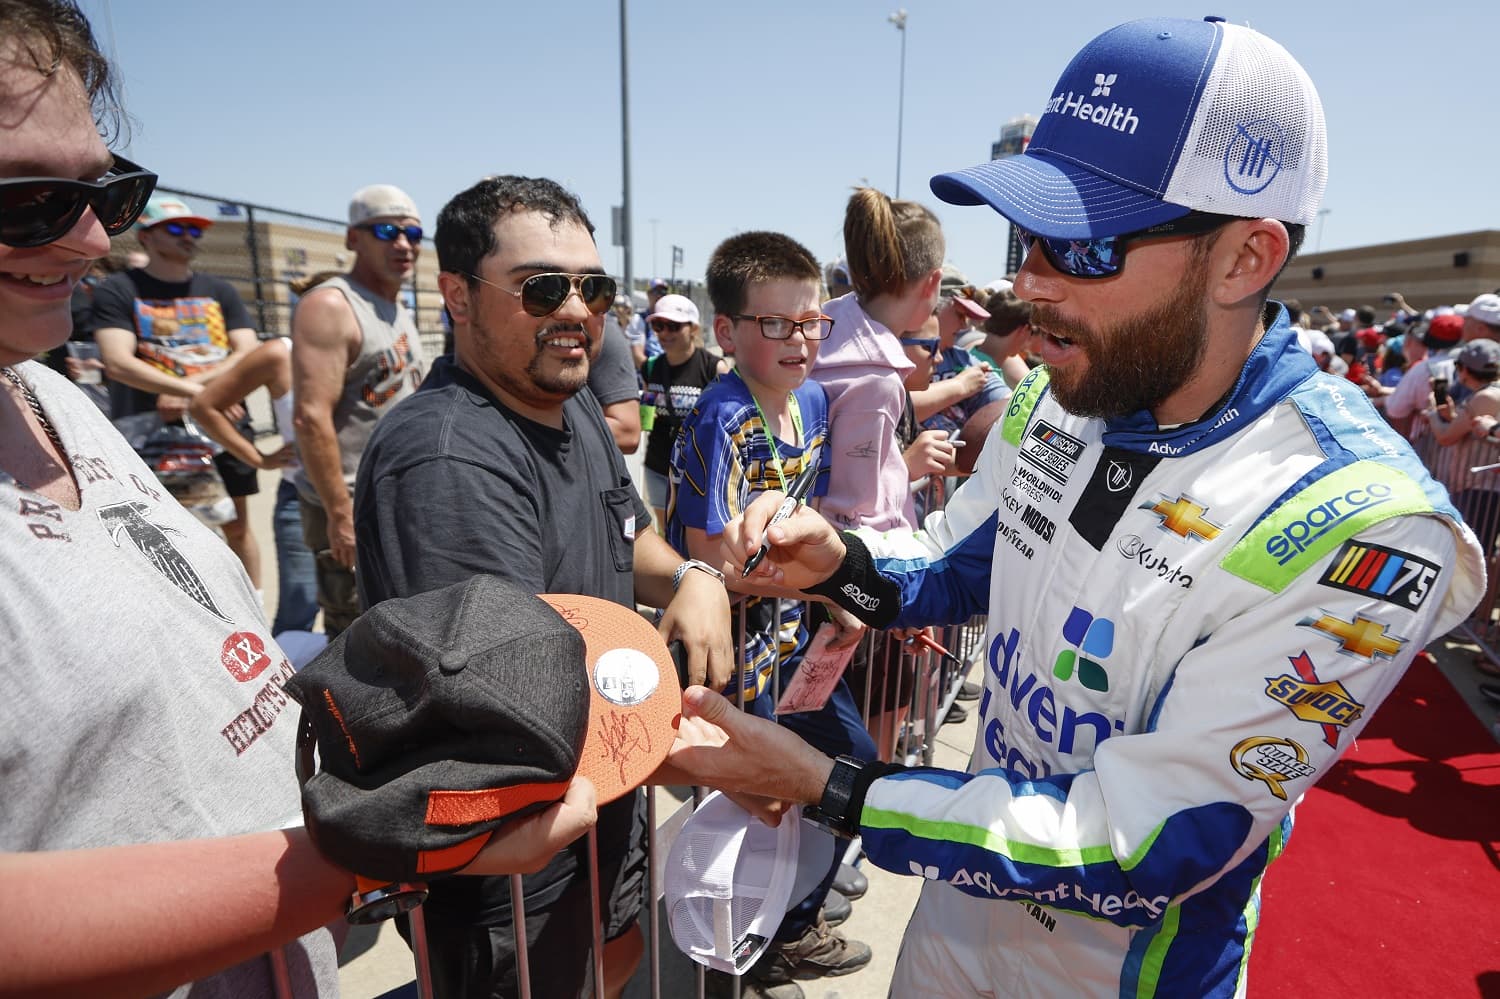 Ross Chastain signs autographs on the red carpet prior to the NASCAR Cup Series Advent Health 400 at Kansas Speedway on May 7, 2023. | Sean Gardner/Getty Images